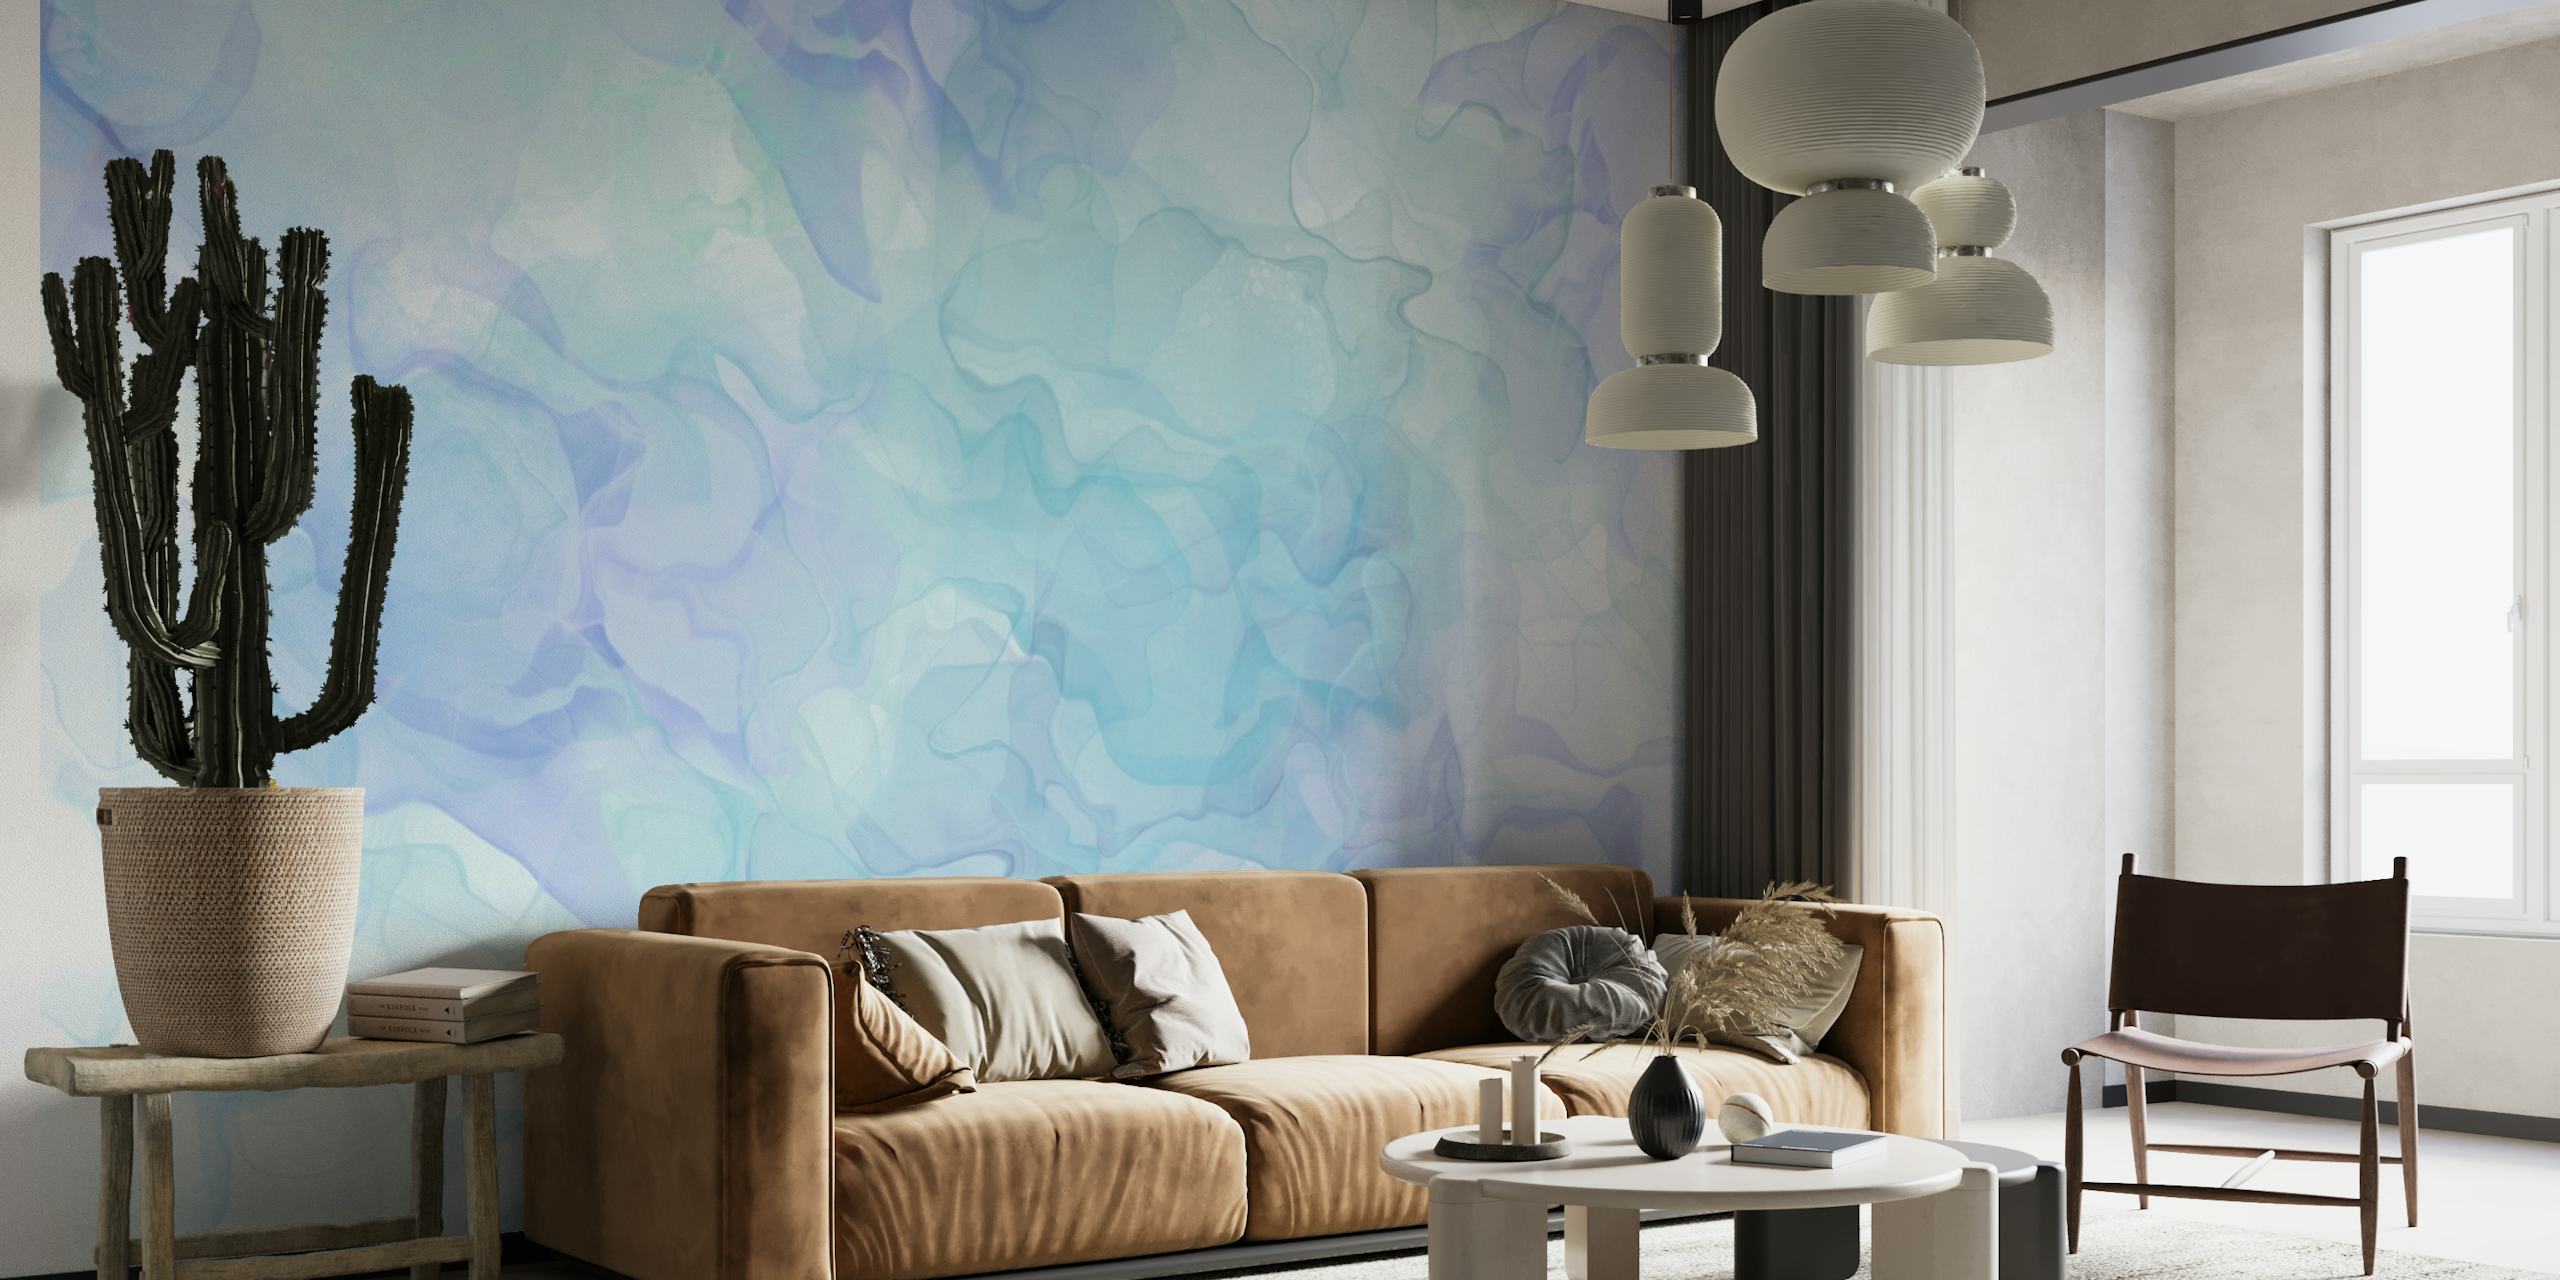 Abstract blue and white alcohol ink wall mural design